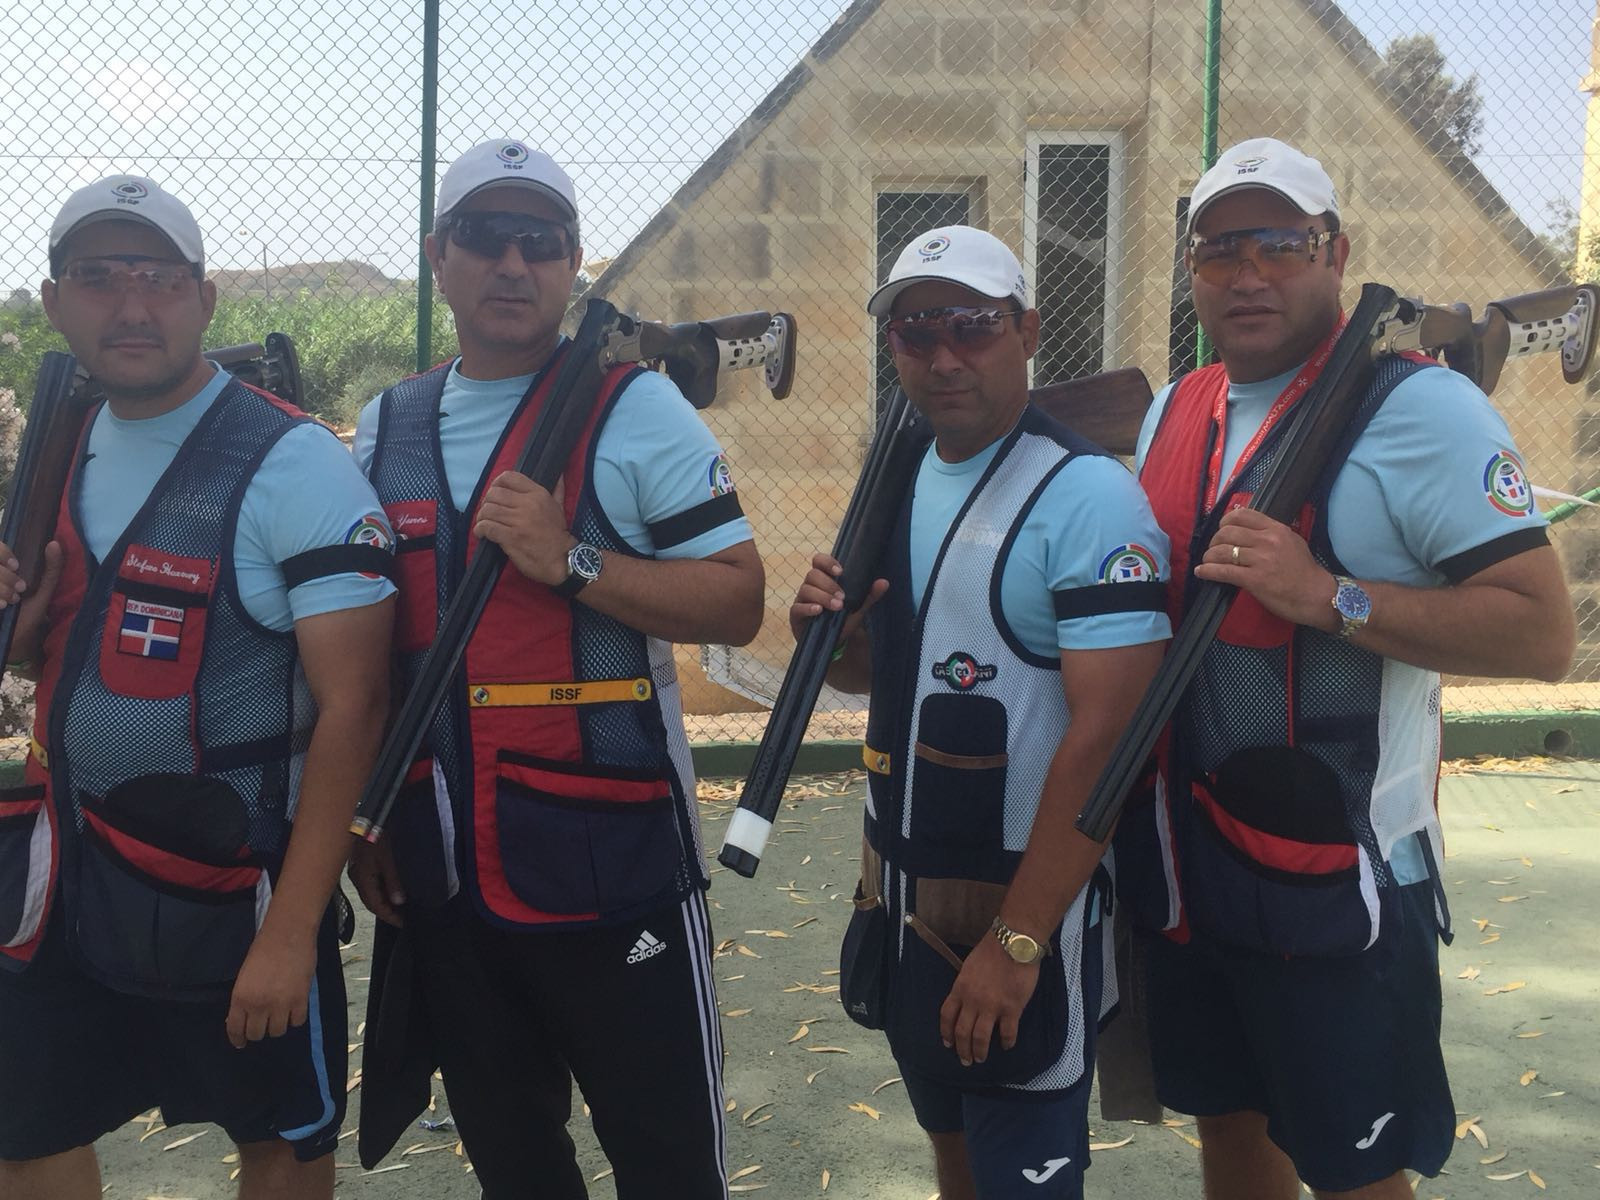 Dominican Republic competitors at the ISSF Shotgun World Cup in Malta wearing black armbands in support of Italy's suspended vice president Rossi ©FITAV